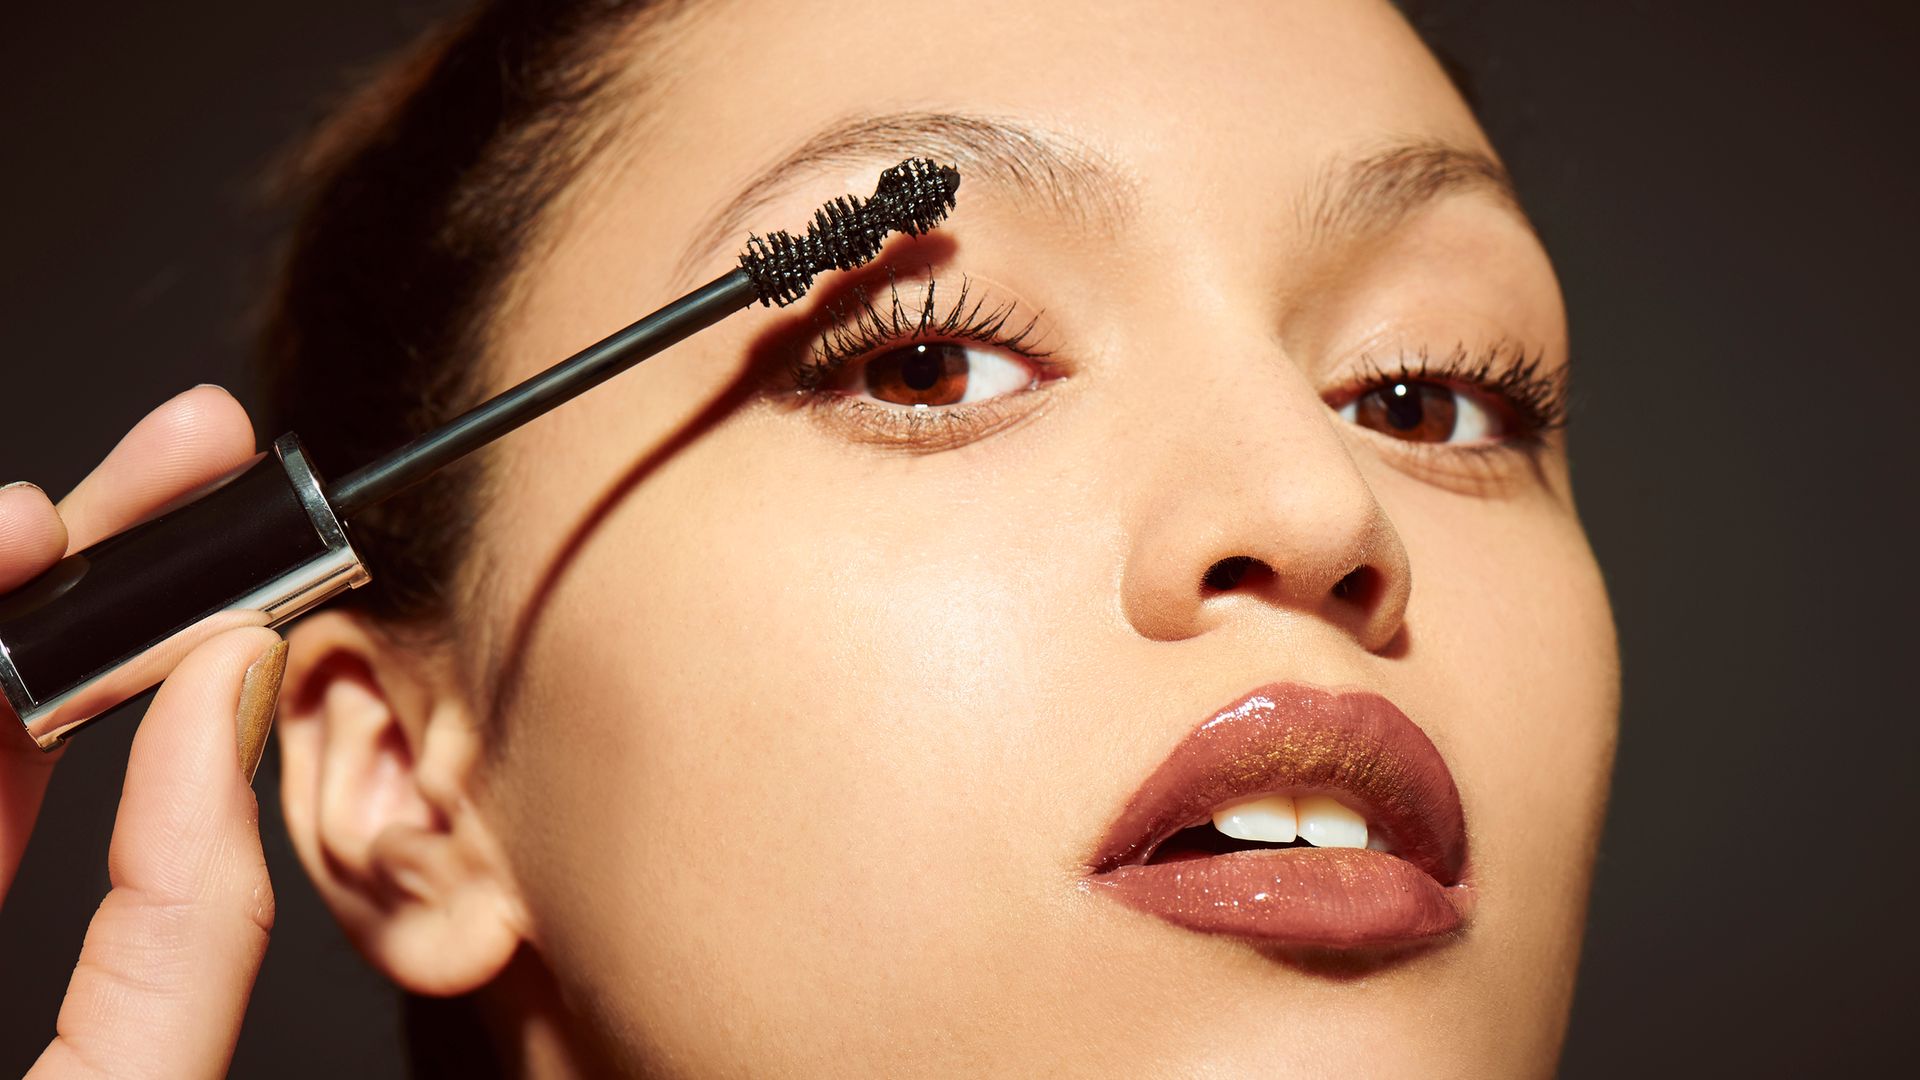 7 waterproof mascaras so good you could run a marathon in them